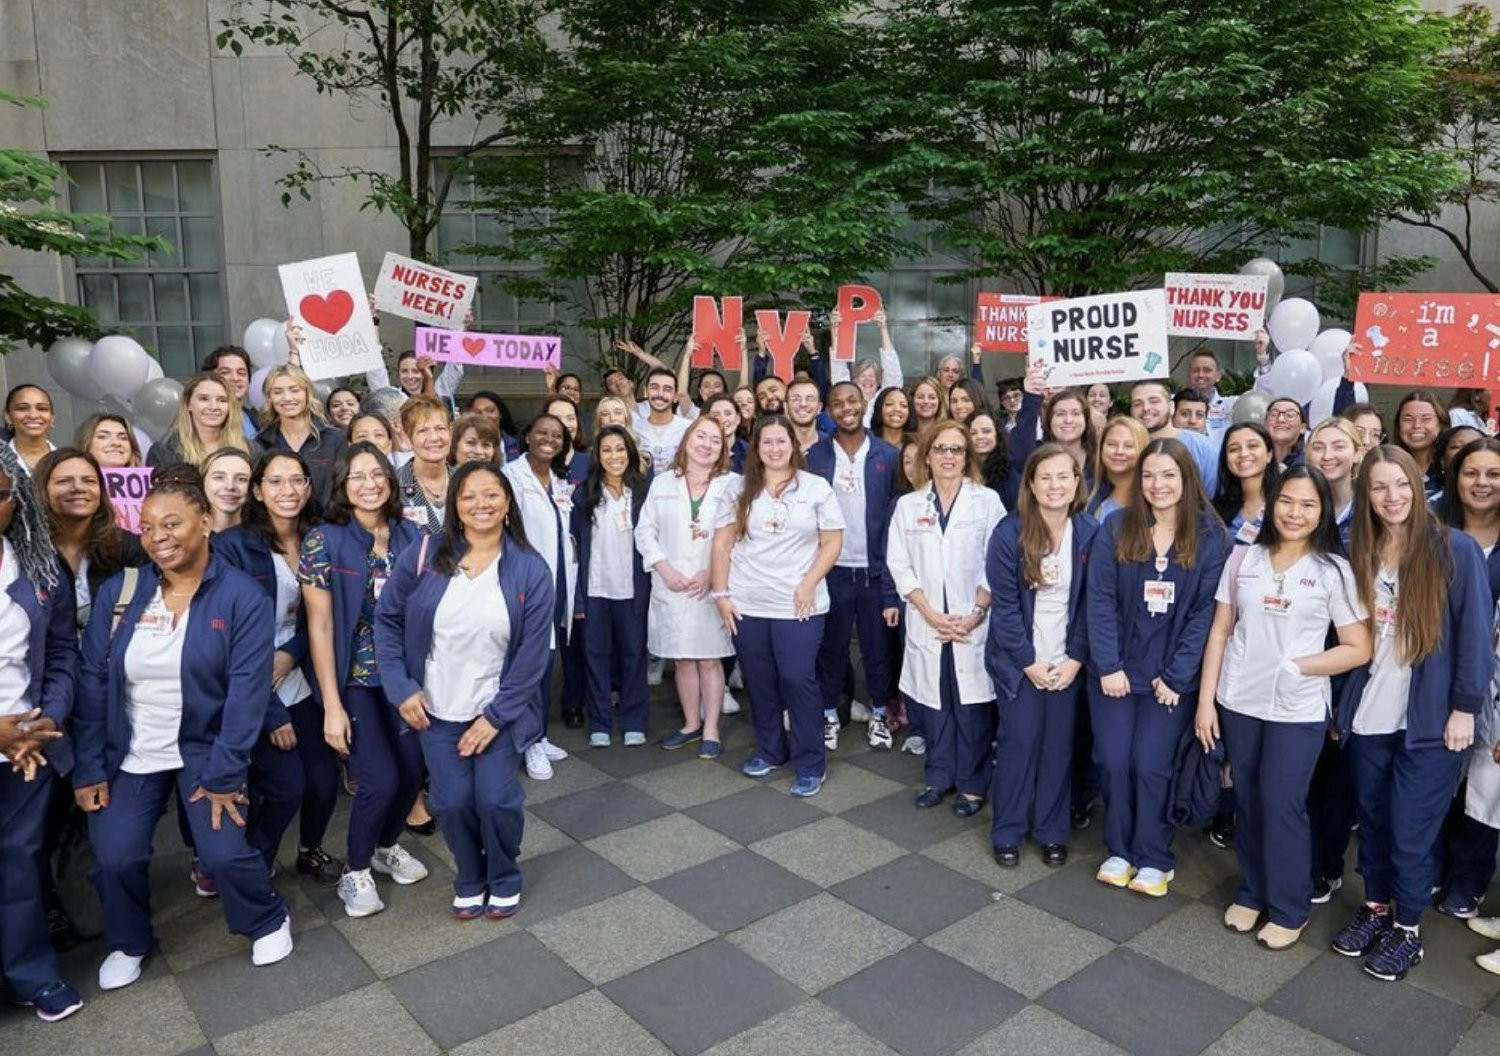 Nursing is not just a job, it’s a calling!  NYP celebrates our amazing Nurses for their incredible work!